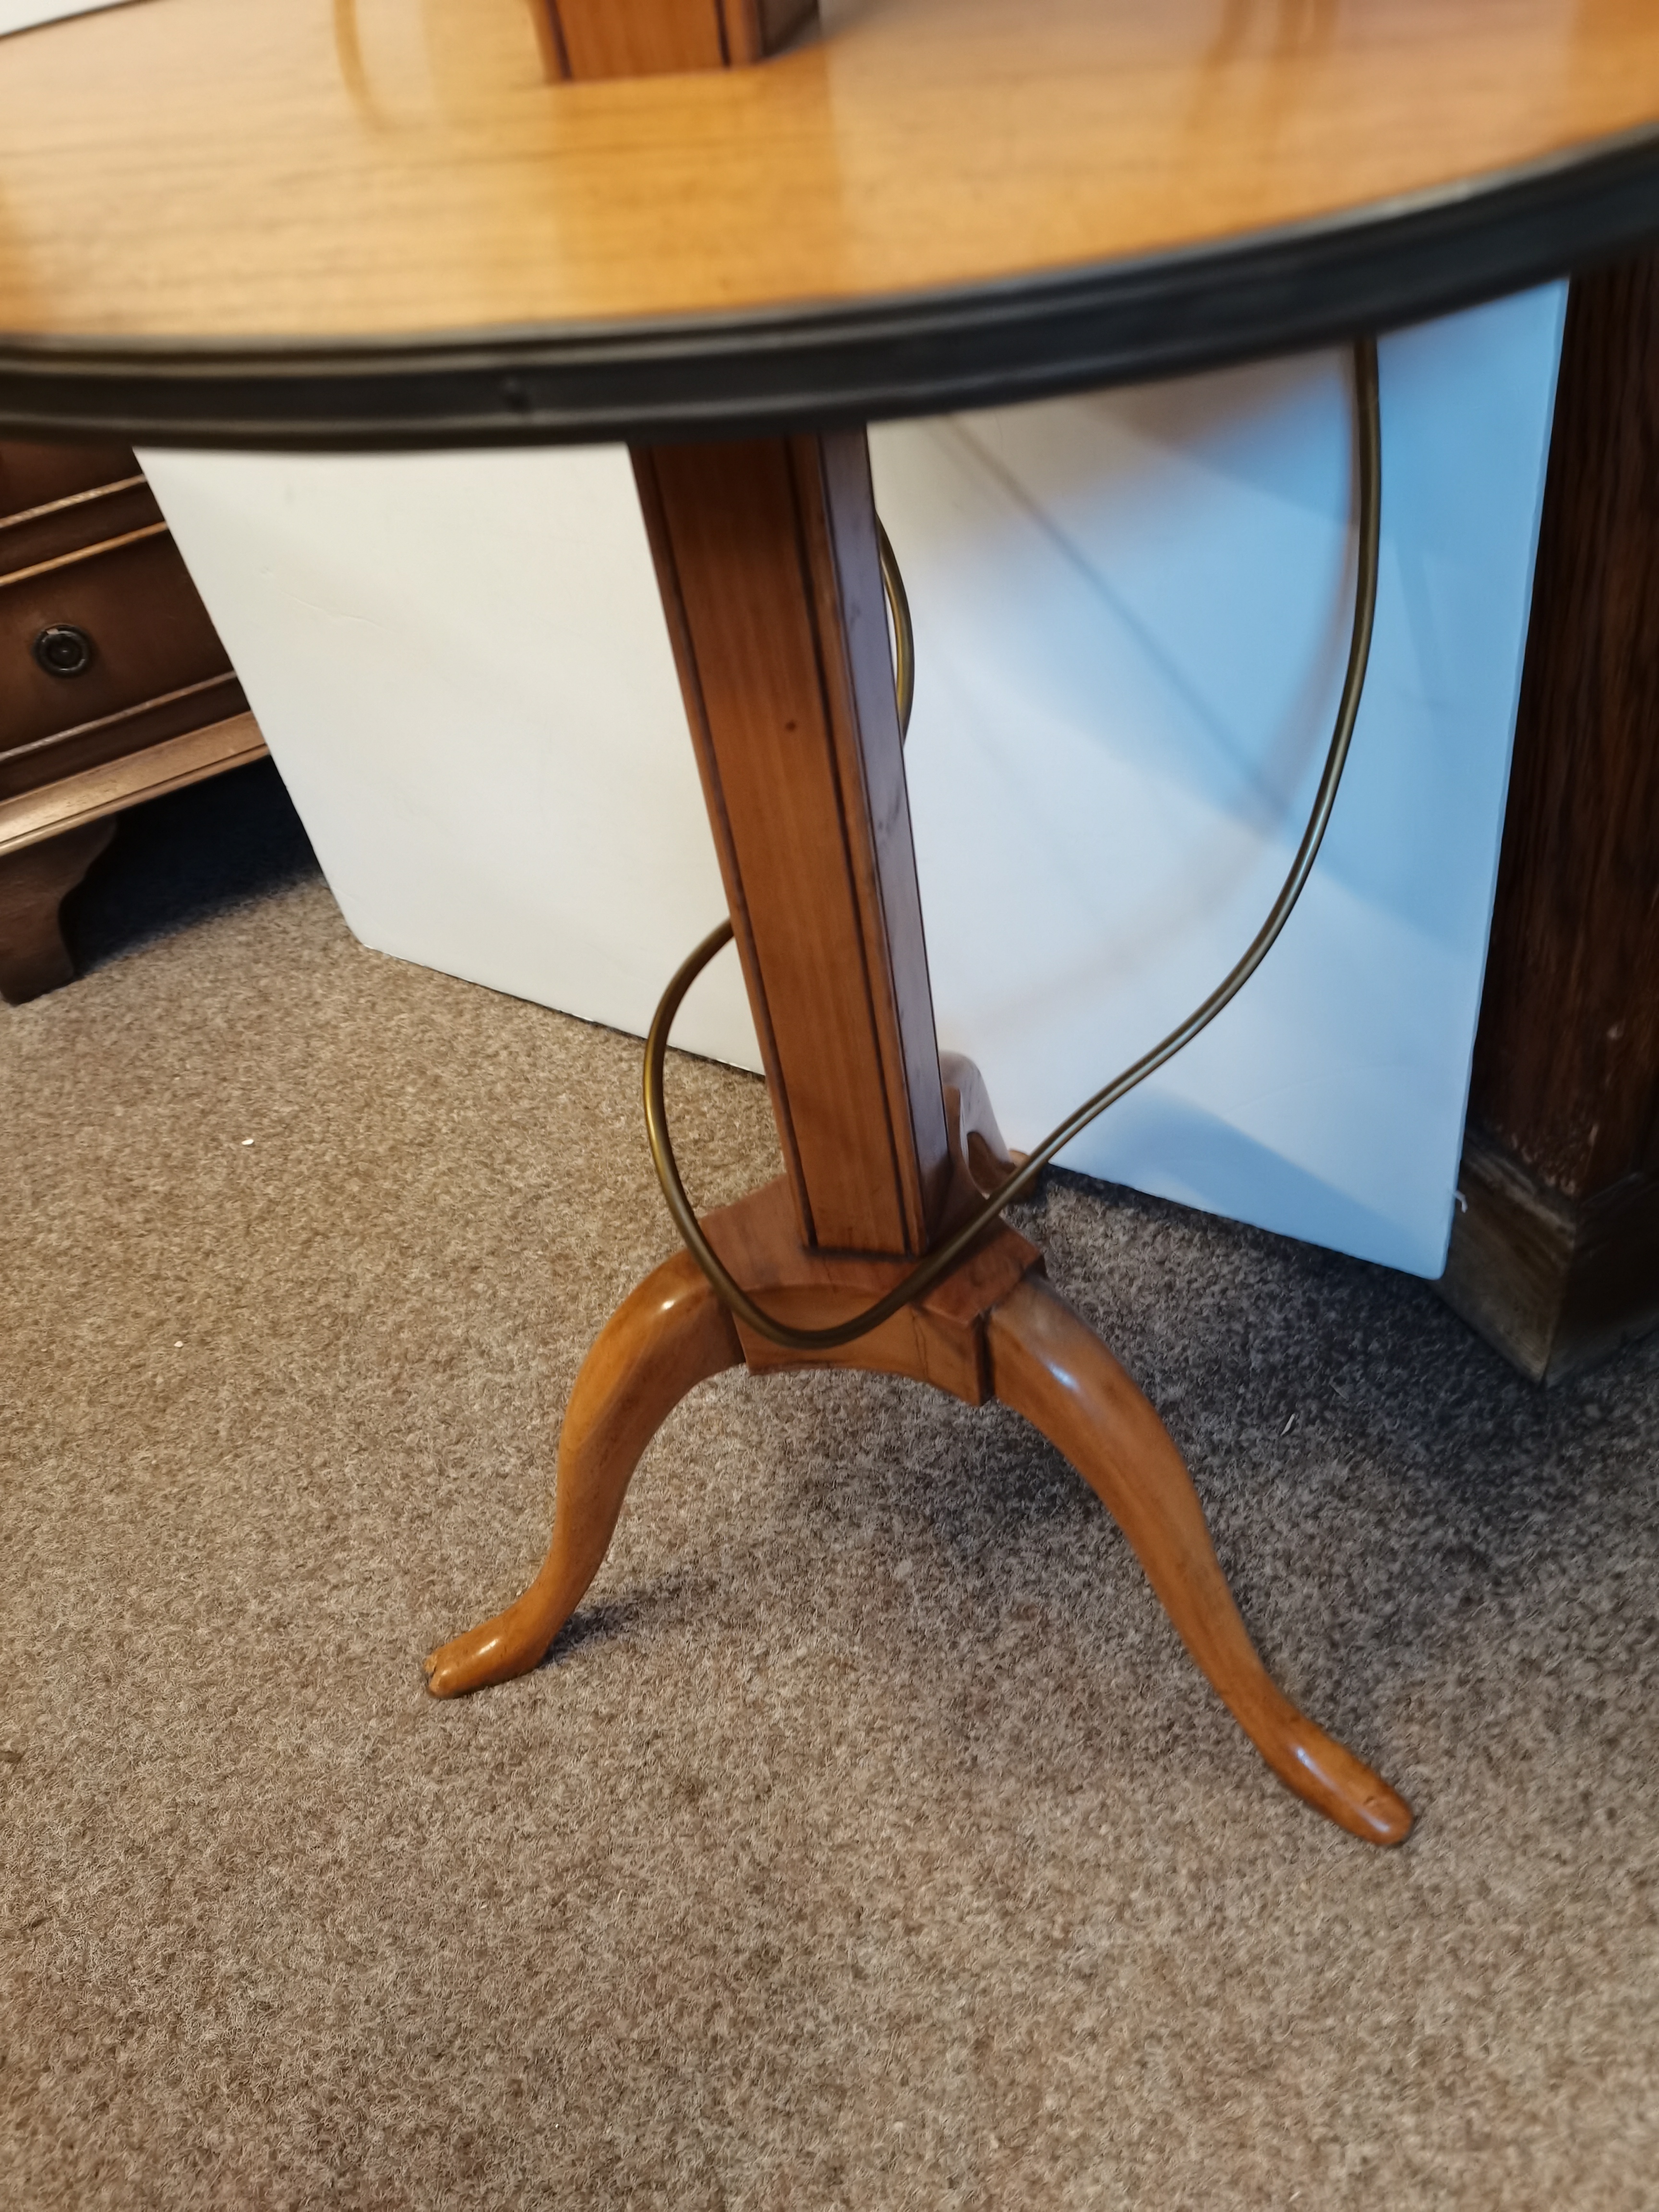 An Antique fruitwood extending side table with 2 x candles and electric bulbs - Image 3 of 3